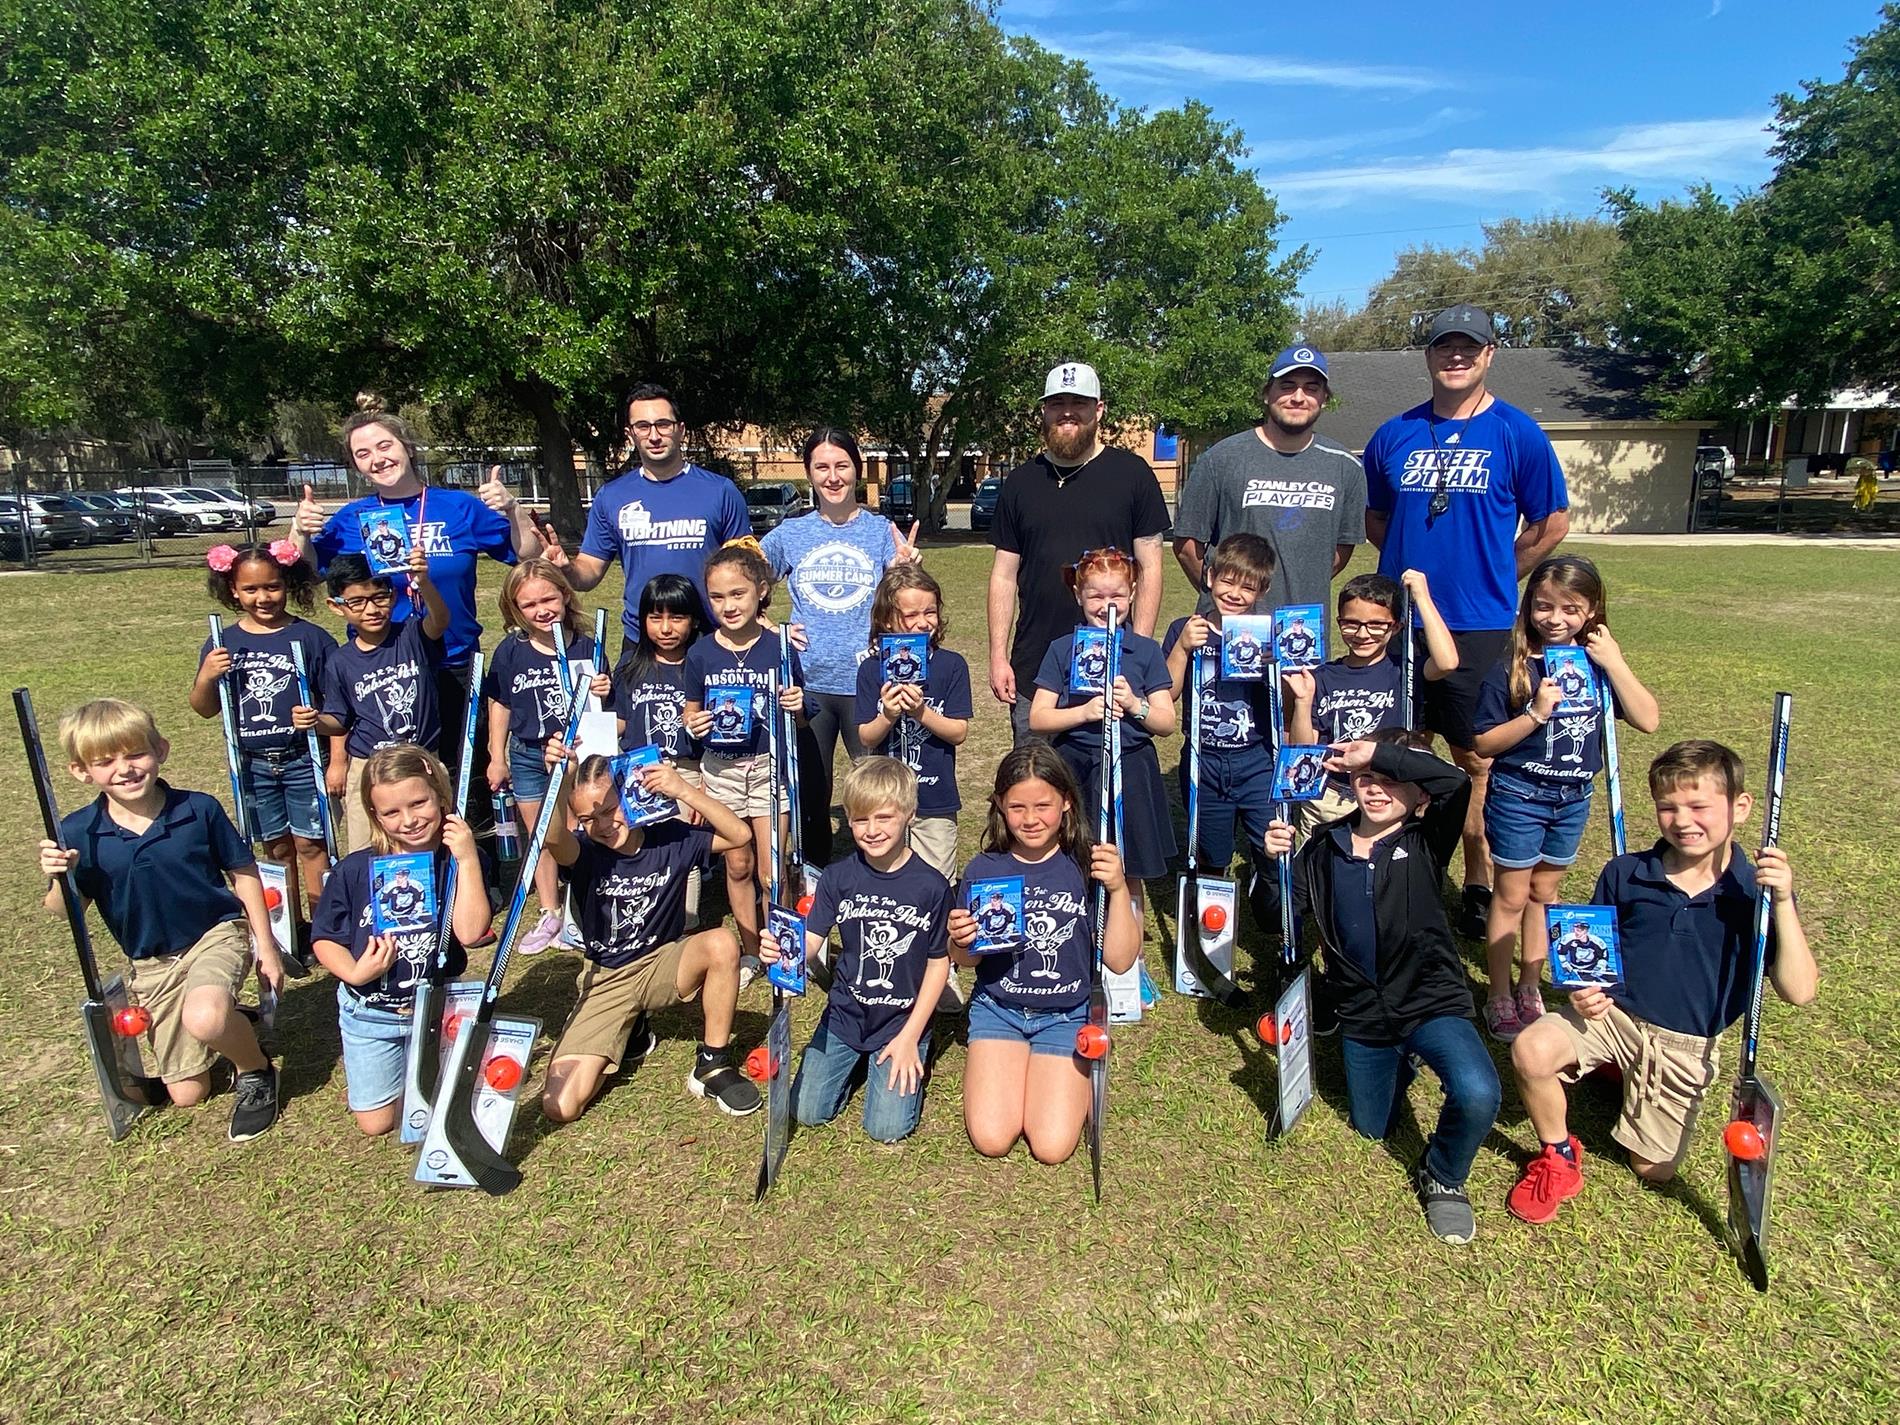 2nd grade students with the Street Hockey Team